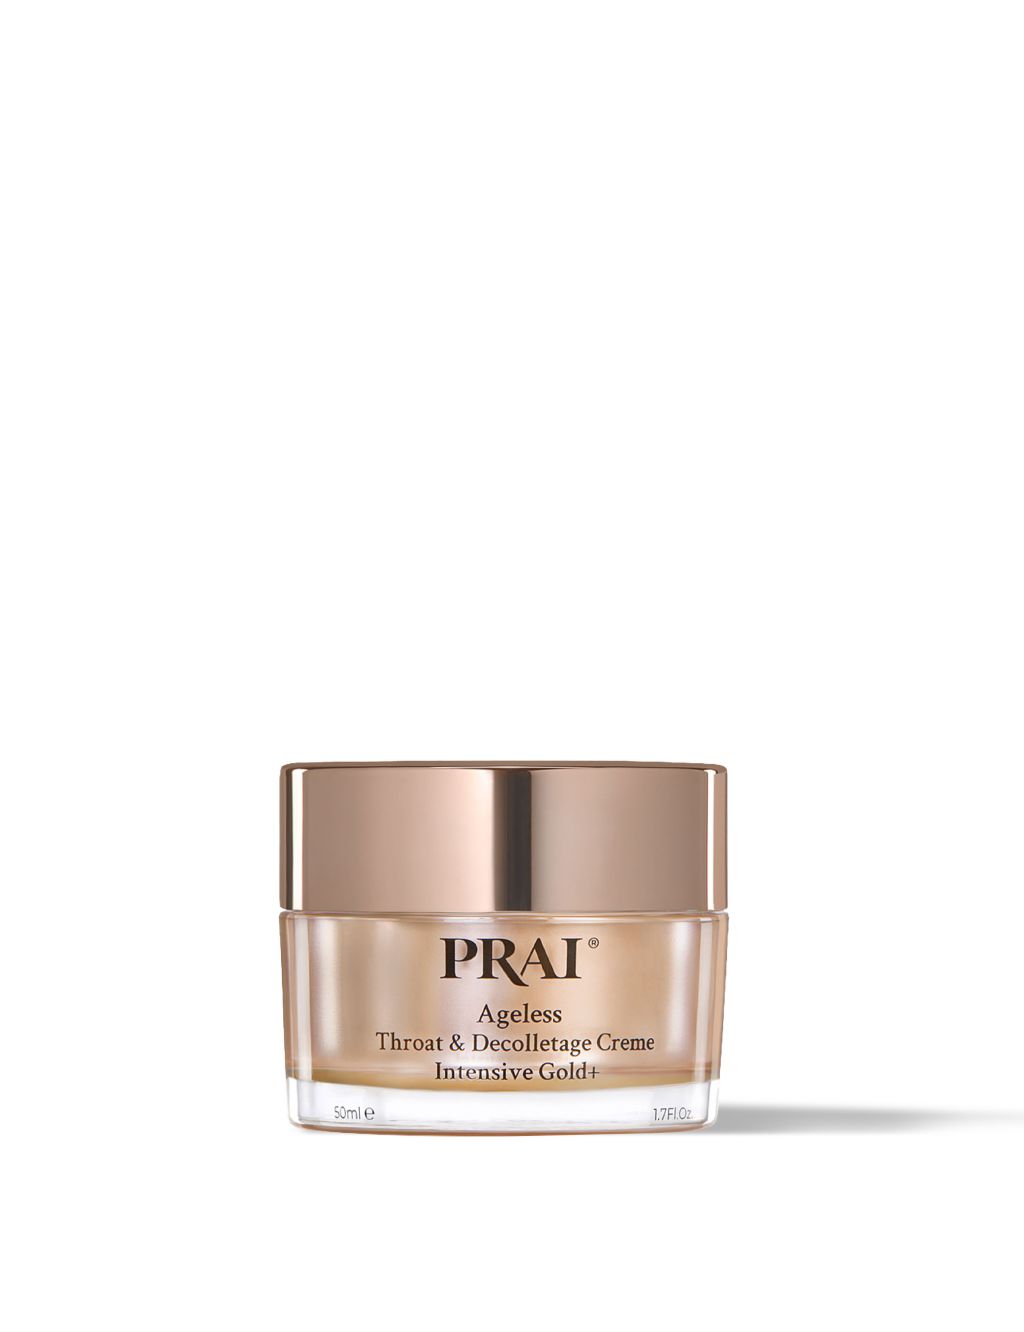 Ageless Throat & Decolletage Creme Intensive Gold + 50ml 3 of 4